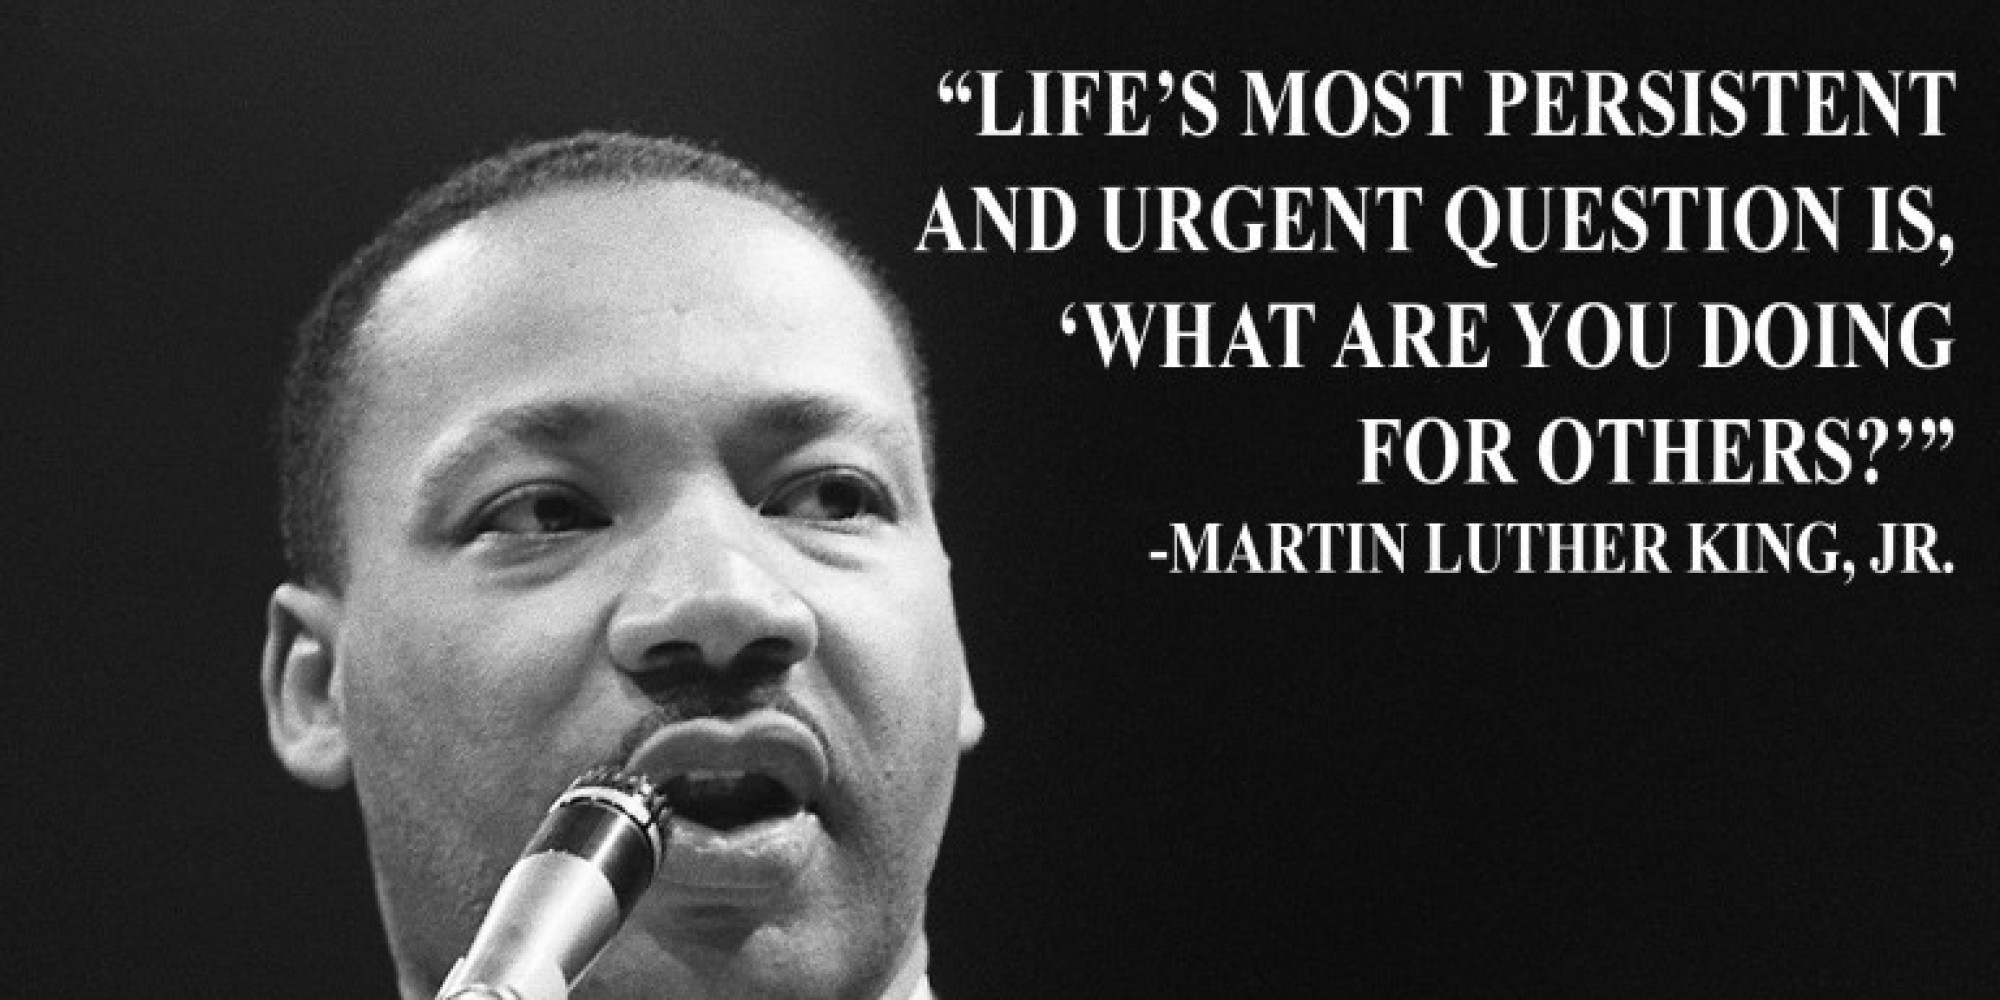 MLK, Jr. Asked Us 'What Are You Doing For Others?' Here's How We Answered